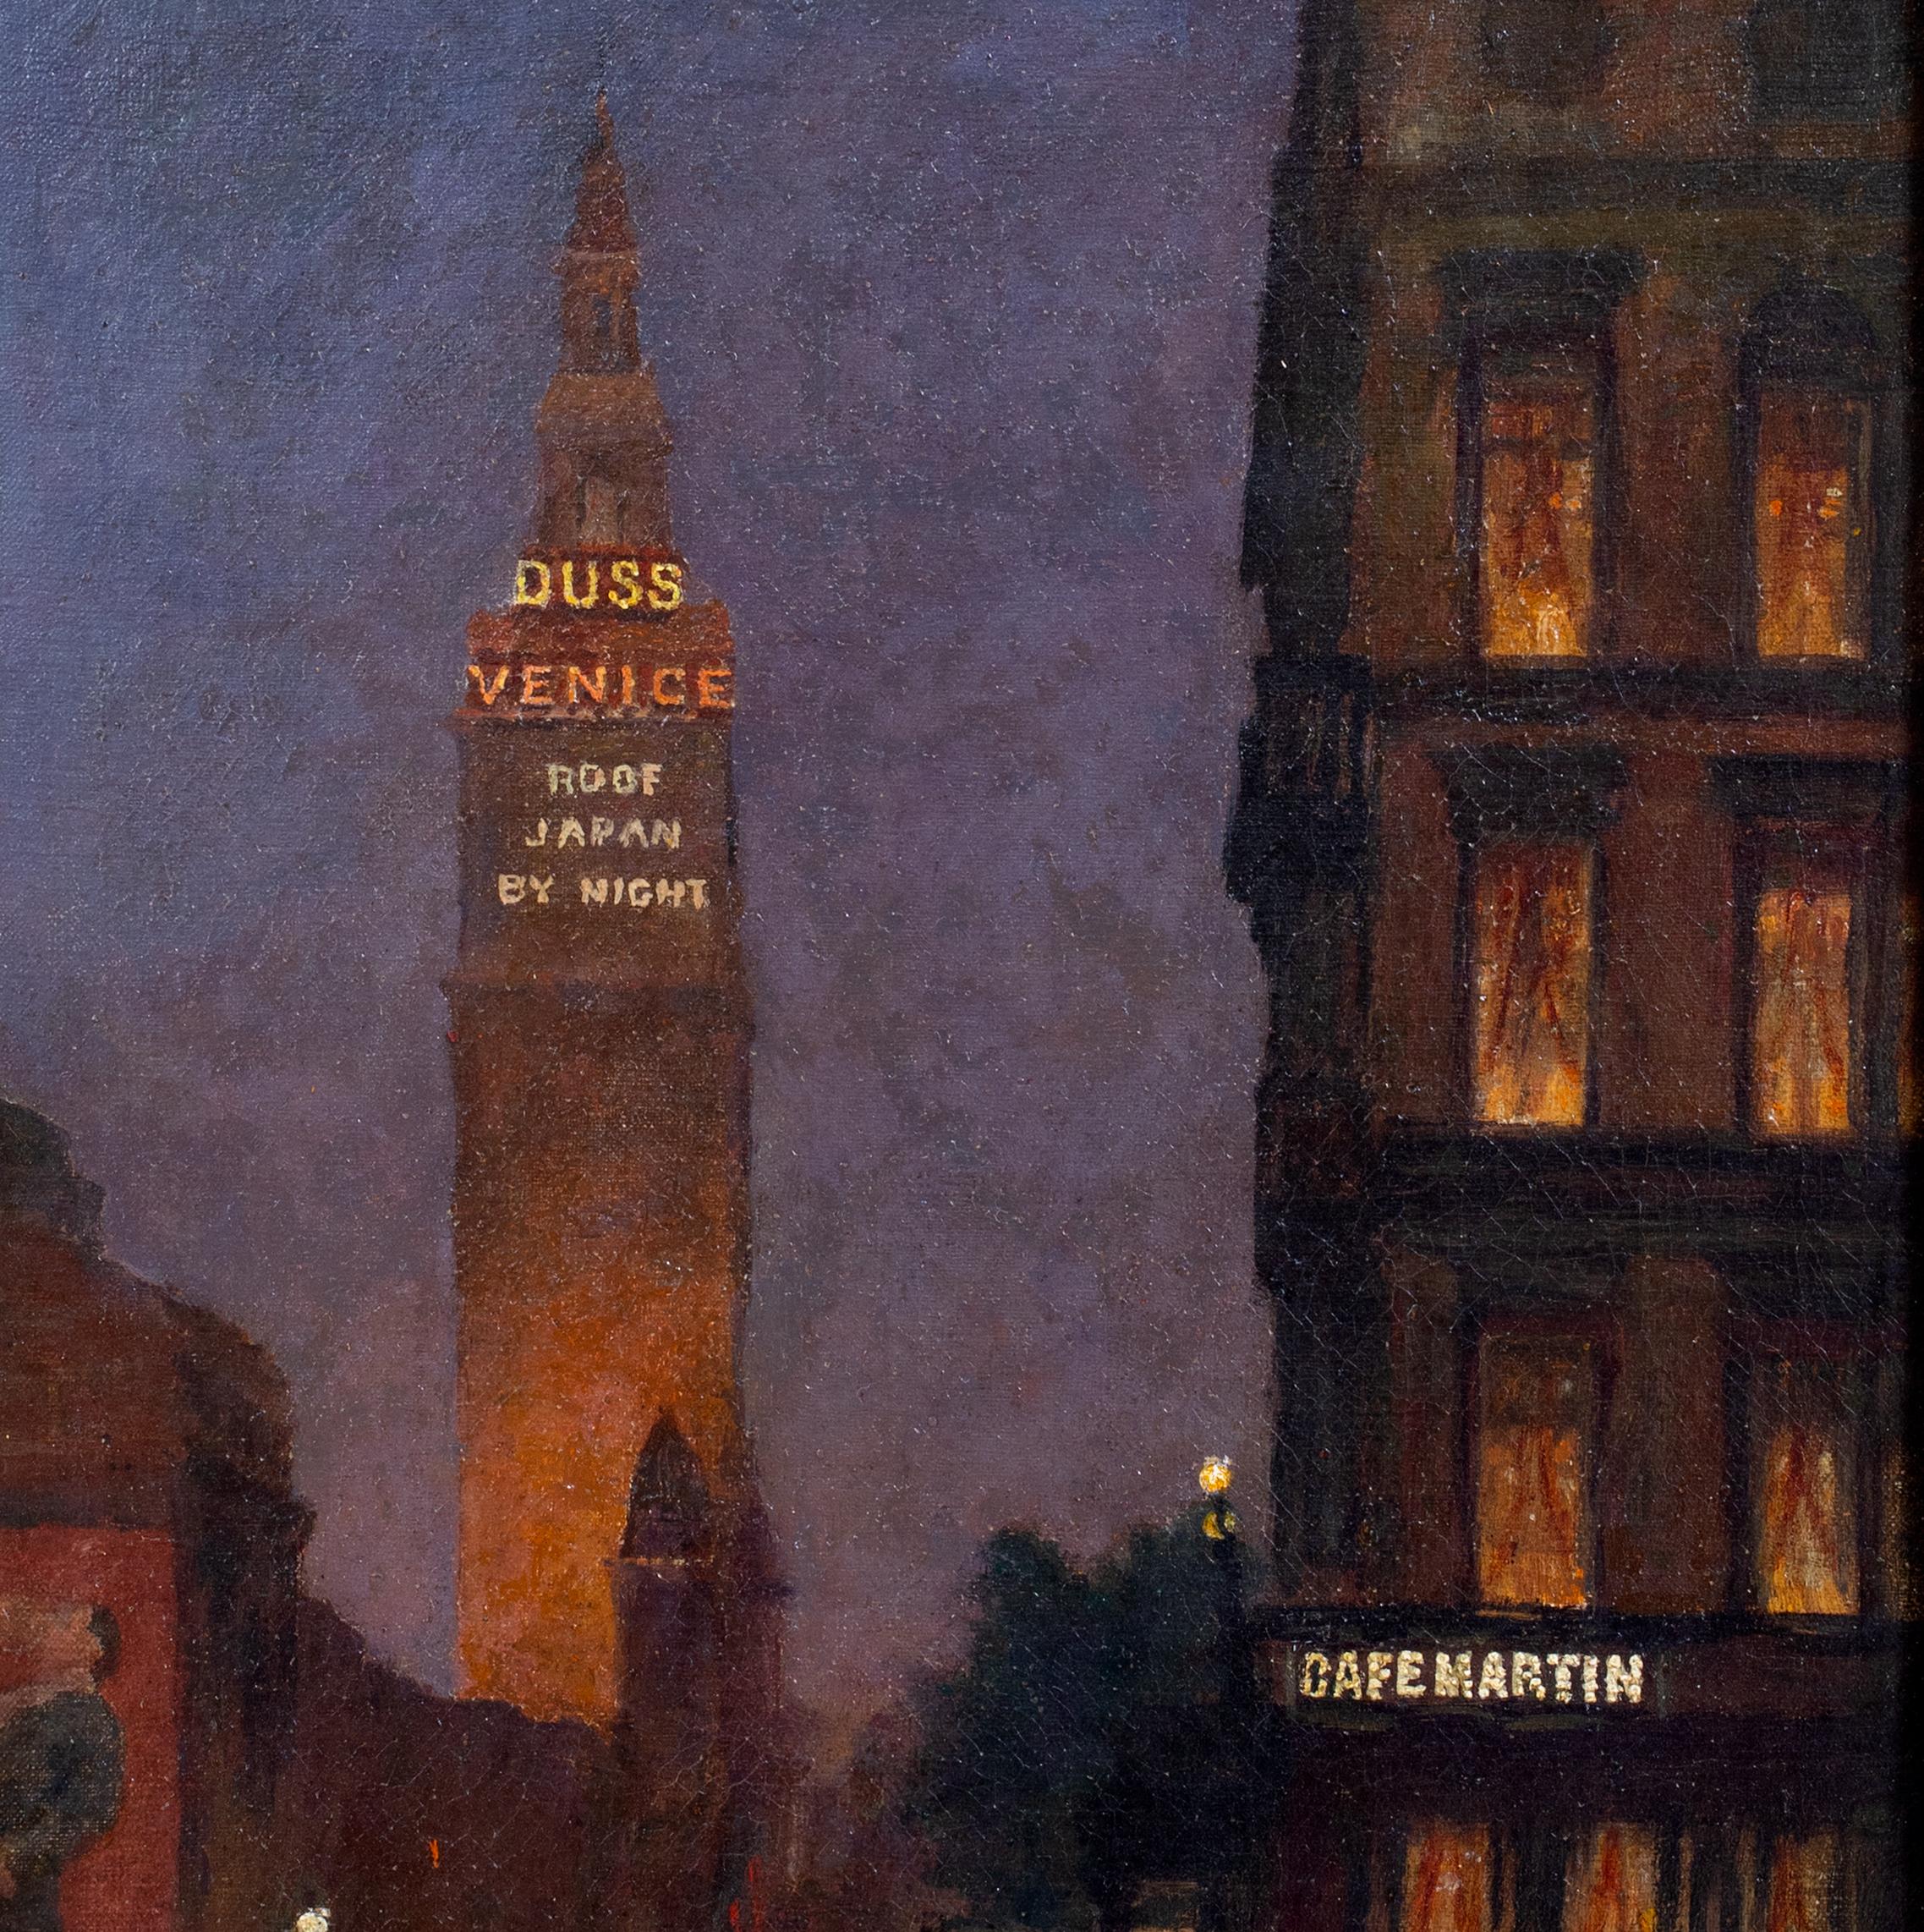 Cafe Martin At Night, Madison Square Park, New York, dated 1902  Rodighiero For Sale 4